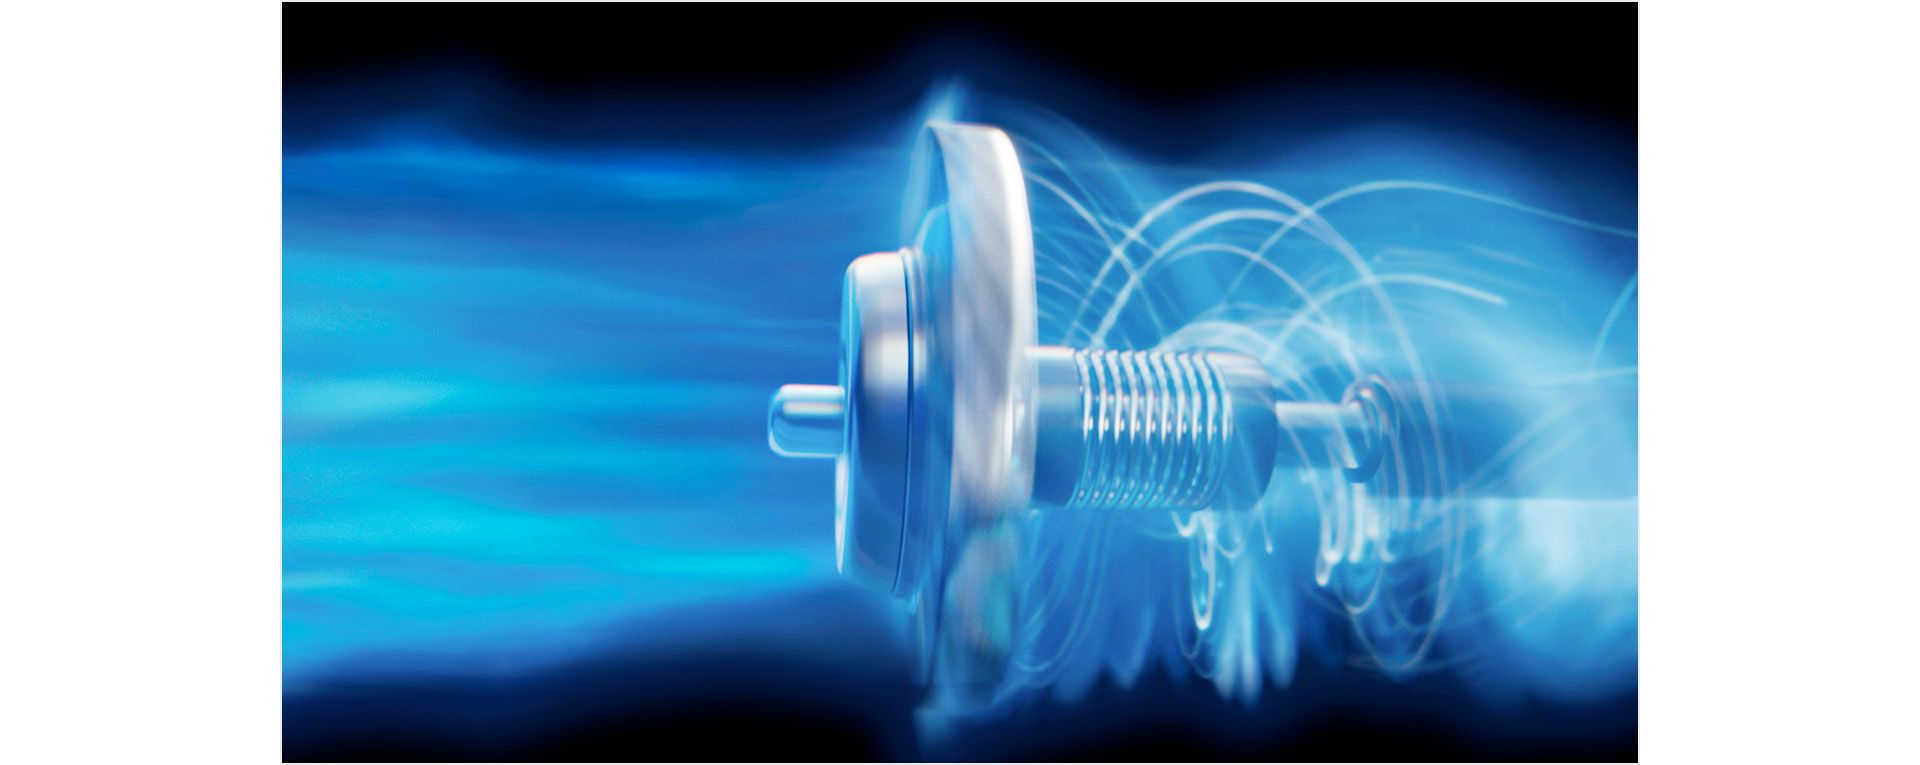 A side-on view of the Hyperdymium motor, with airflow visualised in bright blue.